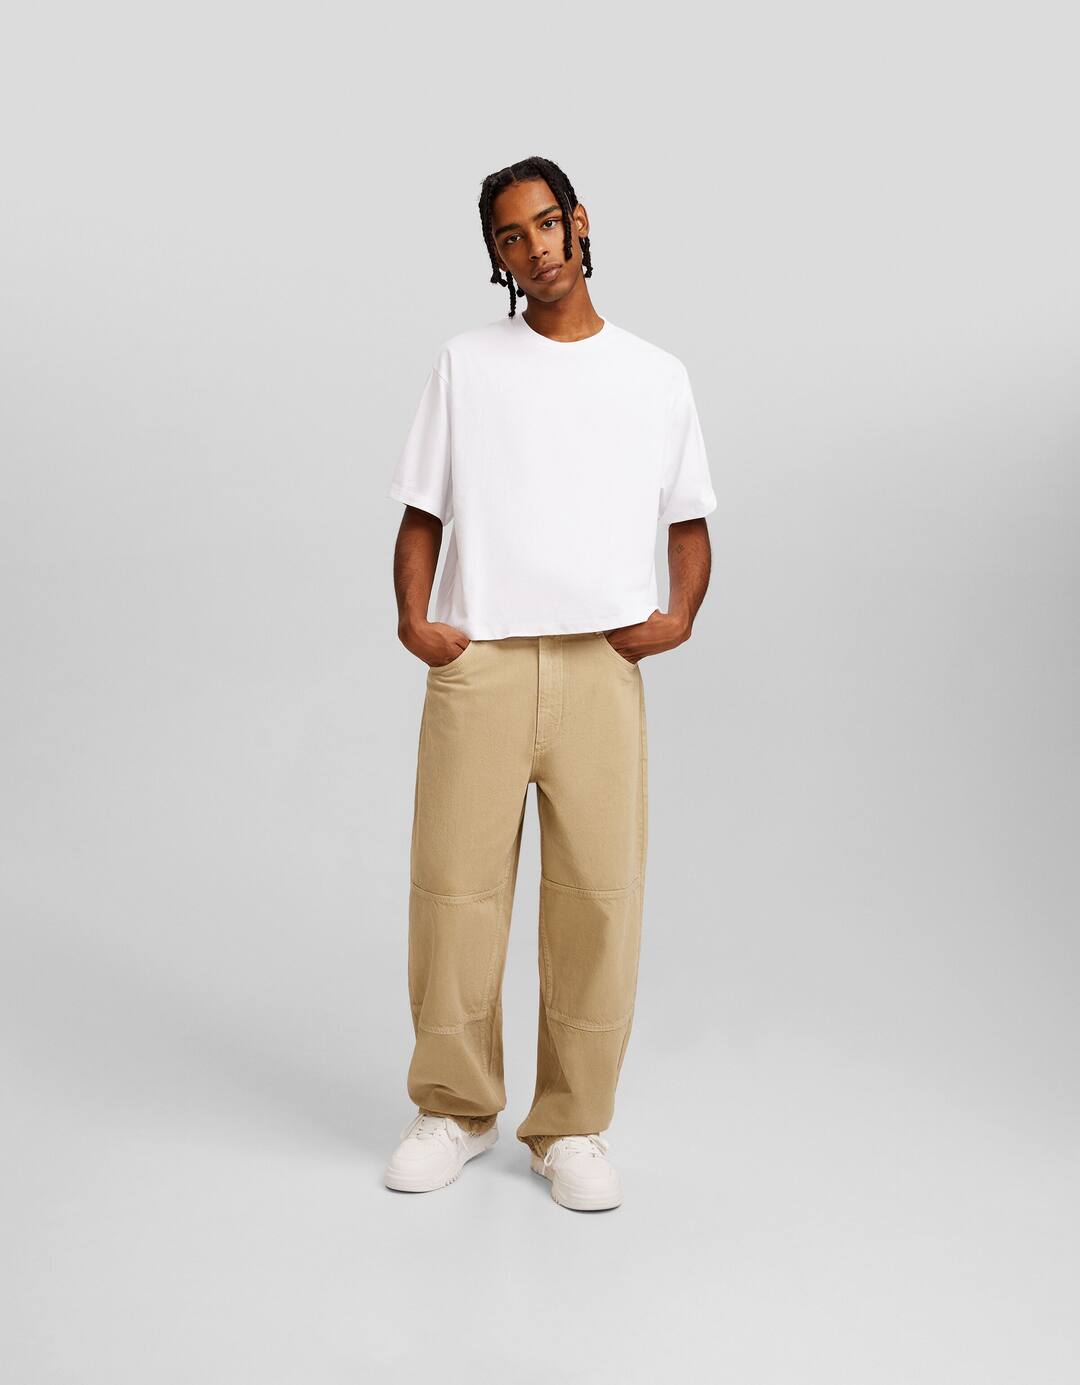 Baggy skater trousers